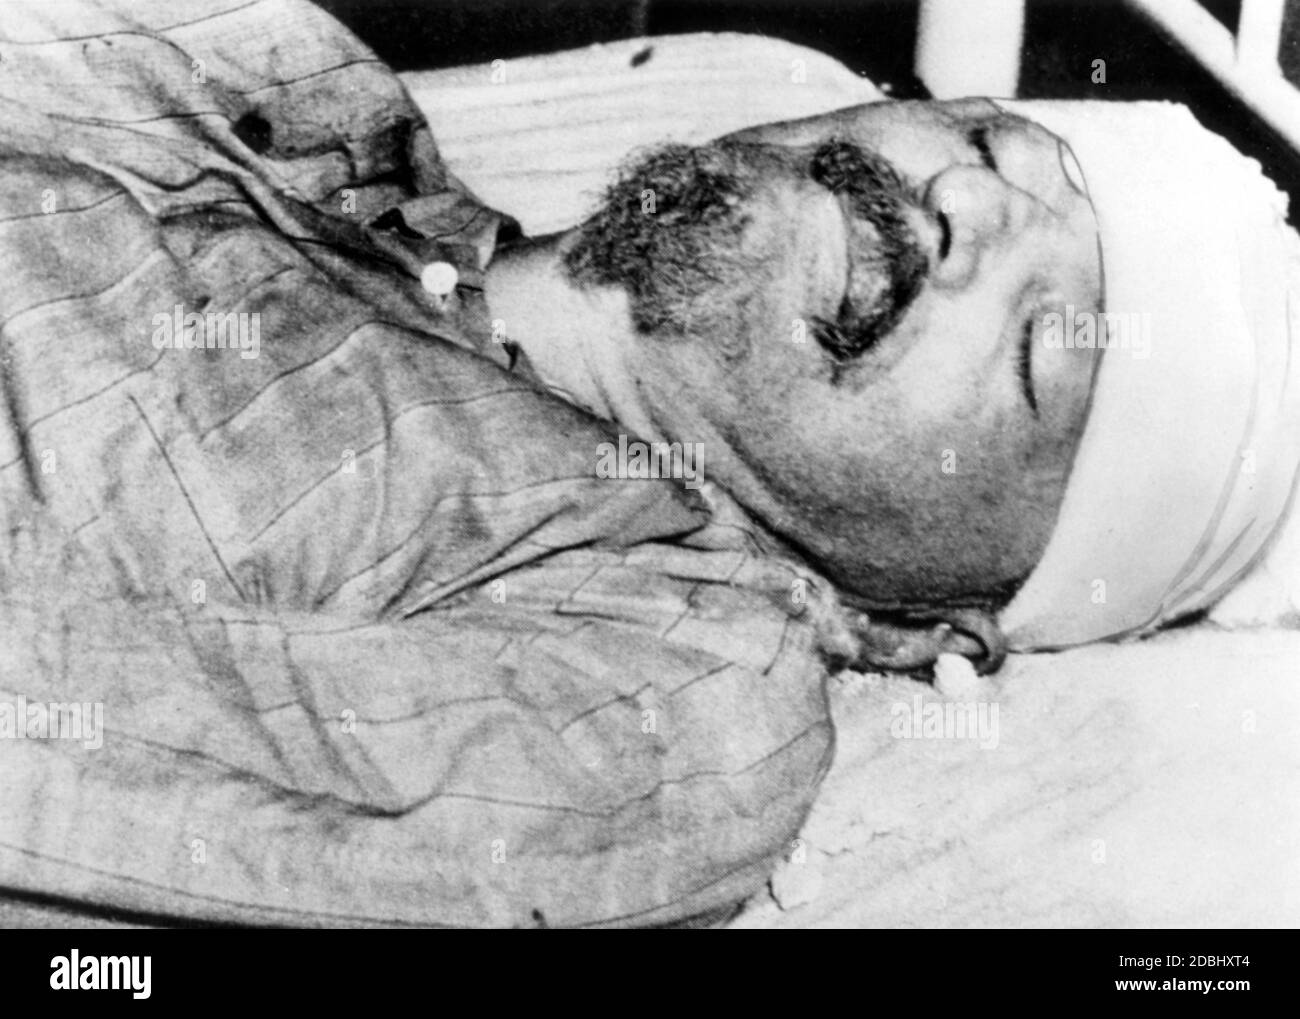 Ramon Mercader after the assassination of Trotsky. He survived his injuries caused by Trotsky's bodyguards and was subsequently sentenced to 20 years in prison. Stock Photo